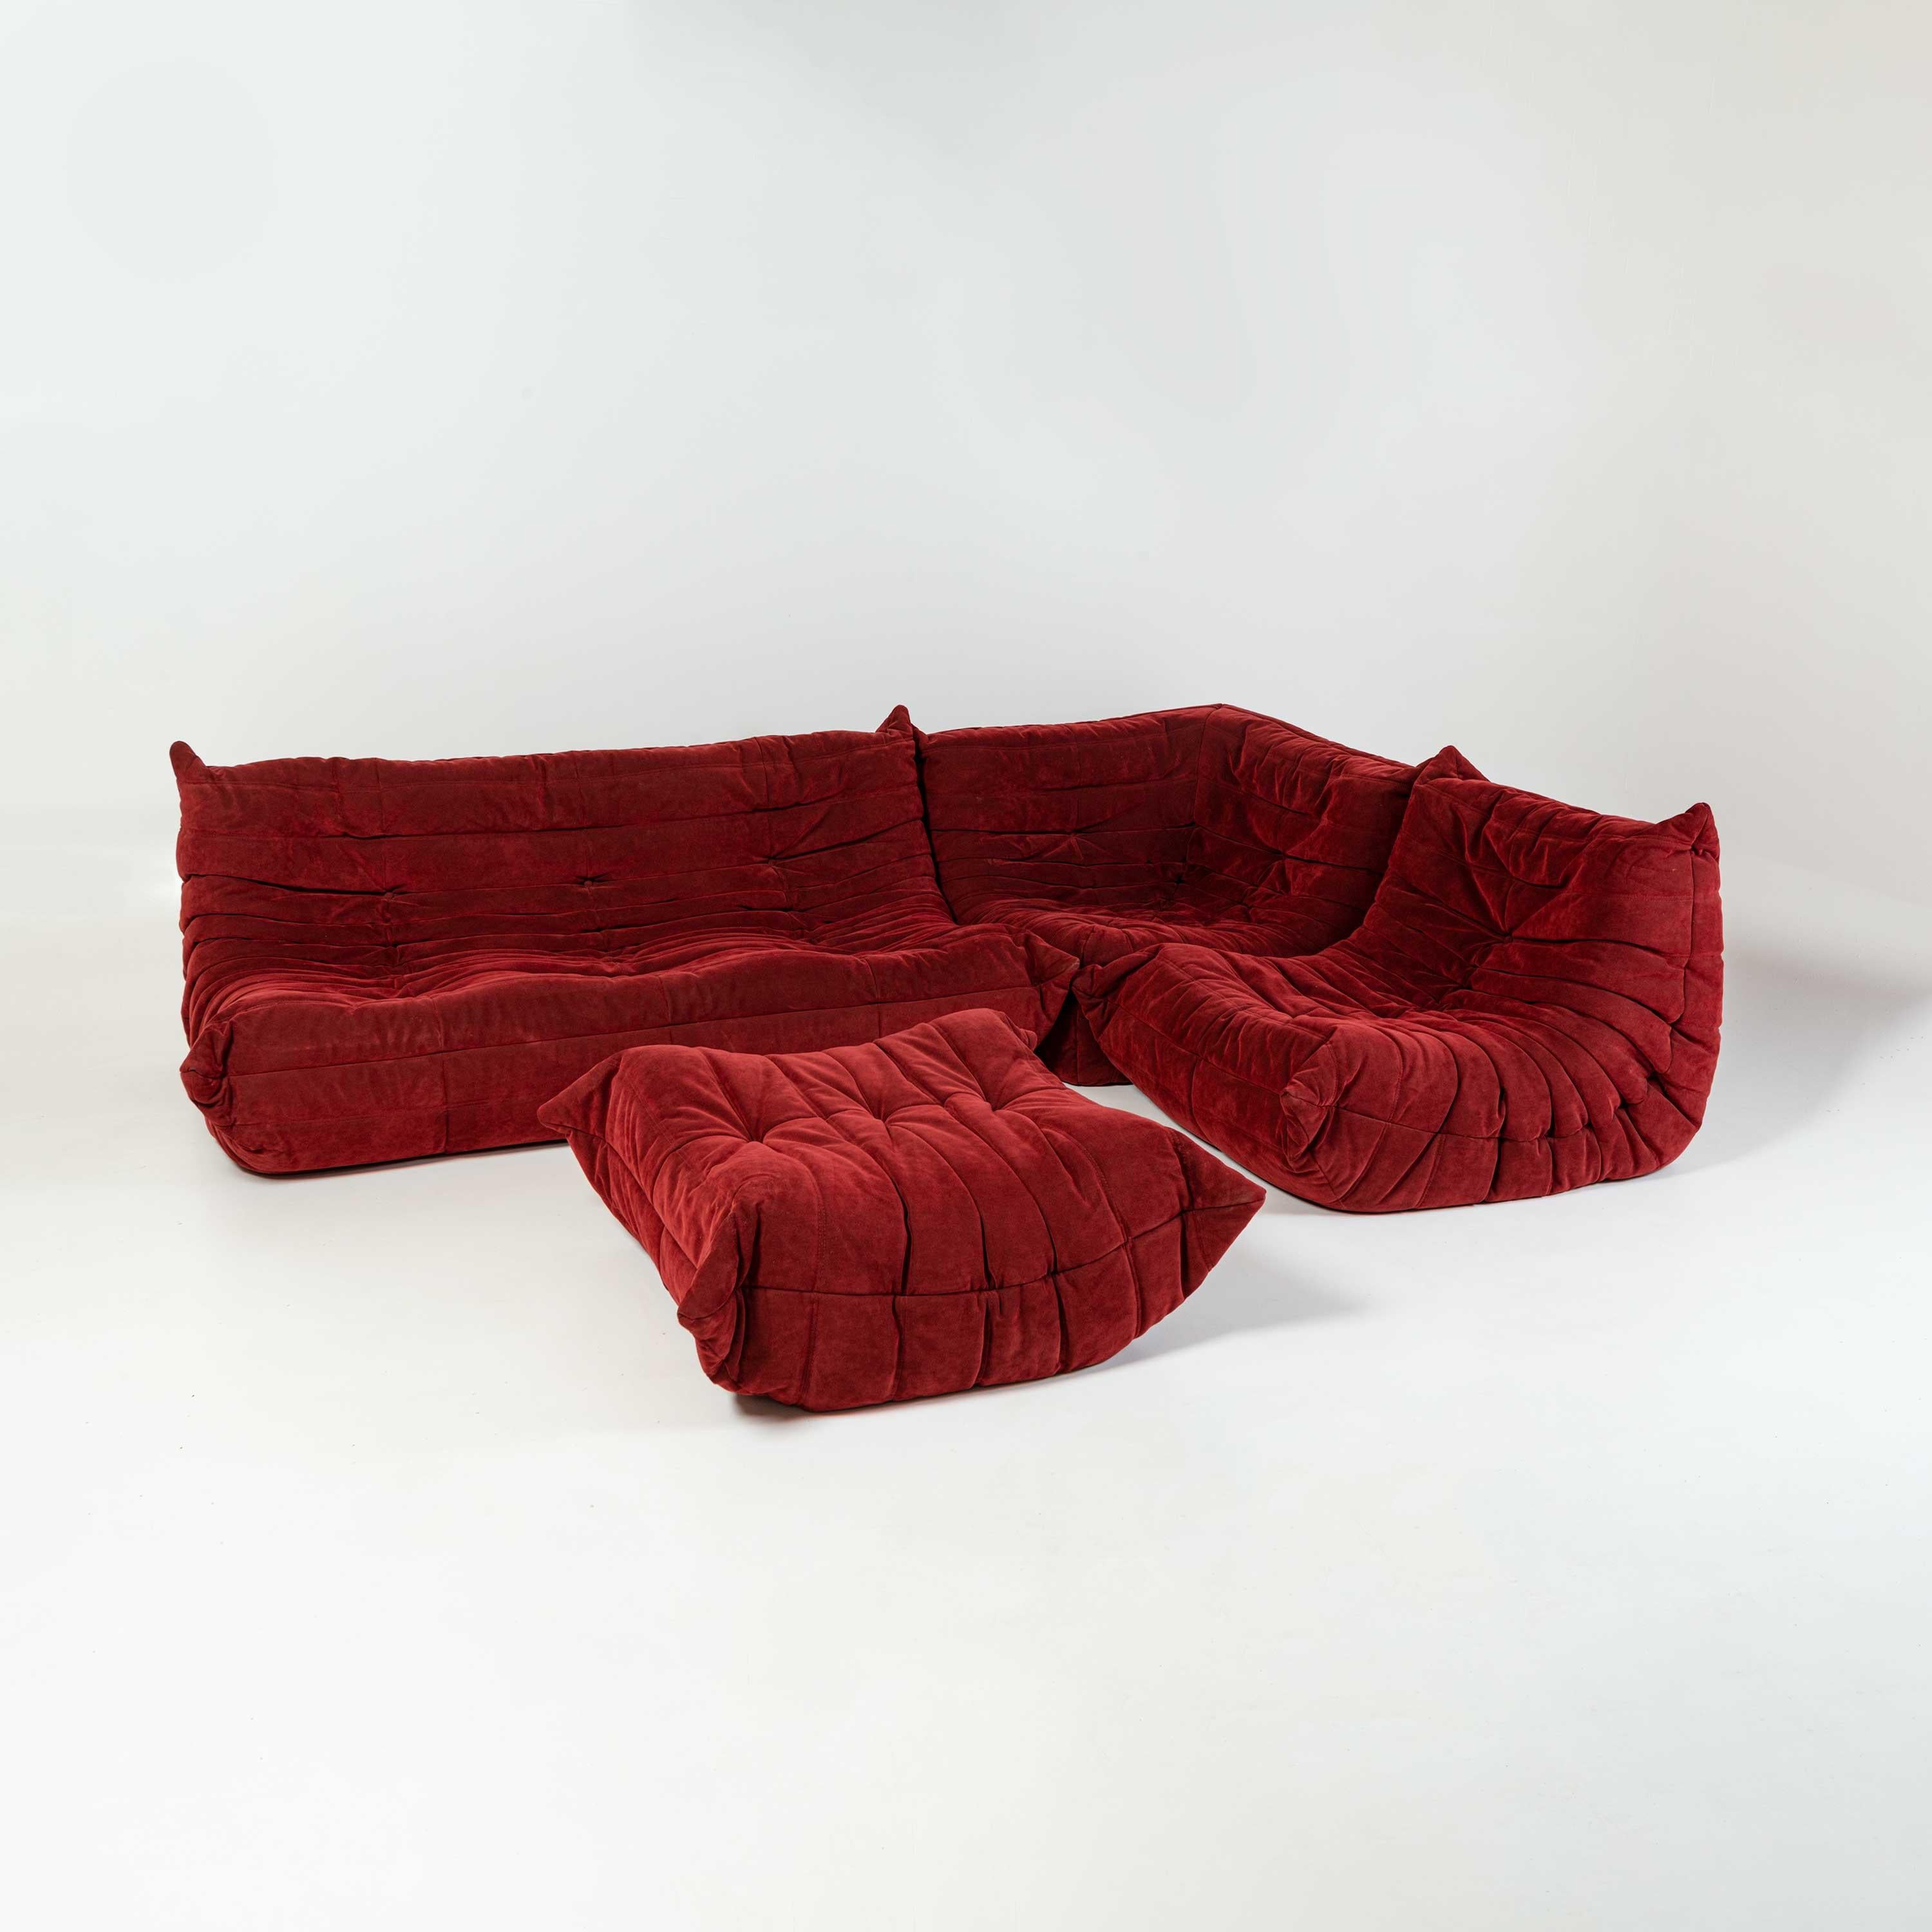 Classic French Togo set by Michel Ducaroy for luxury brand Ligne Roset. Originally designed in the 1970s the iconic togo sofa is now a design classic. This set comes in it's original Bordeaux Alcantara which, unlike leather, doesn't get hot or soggy